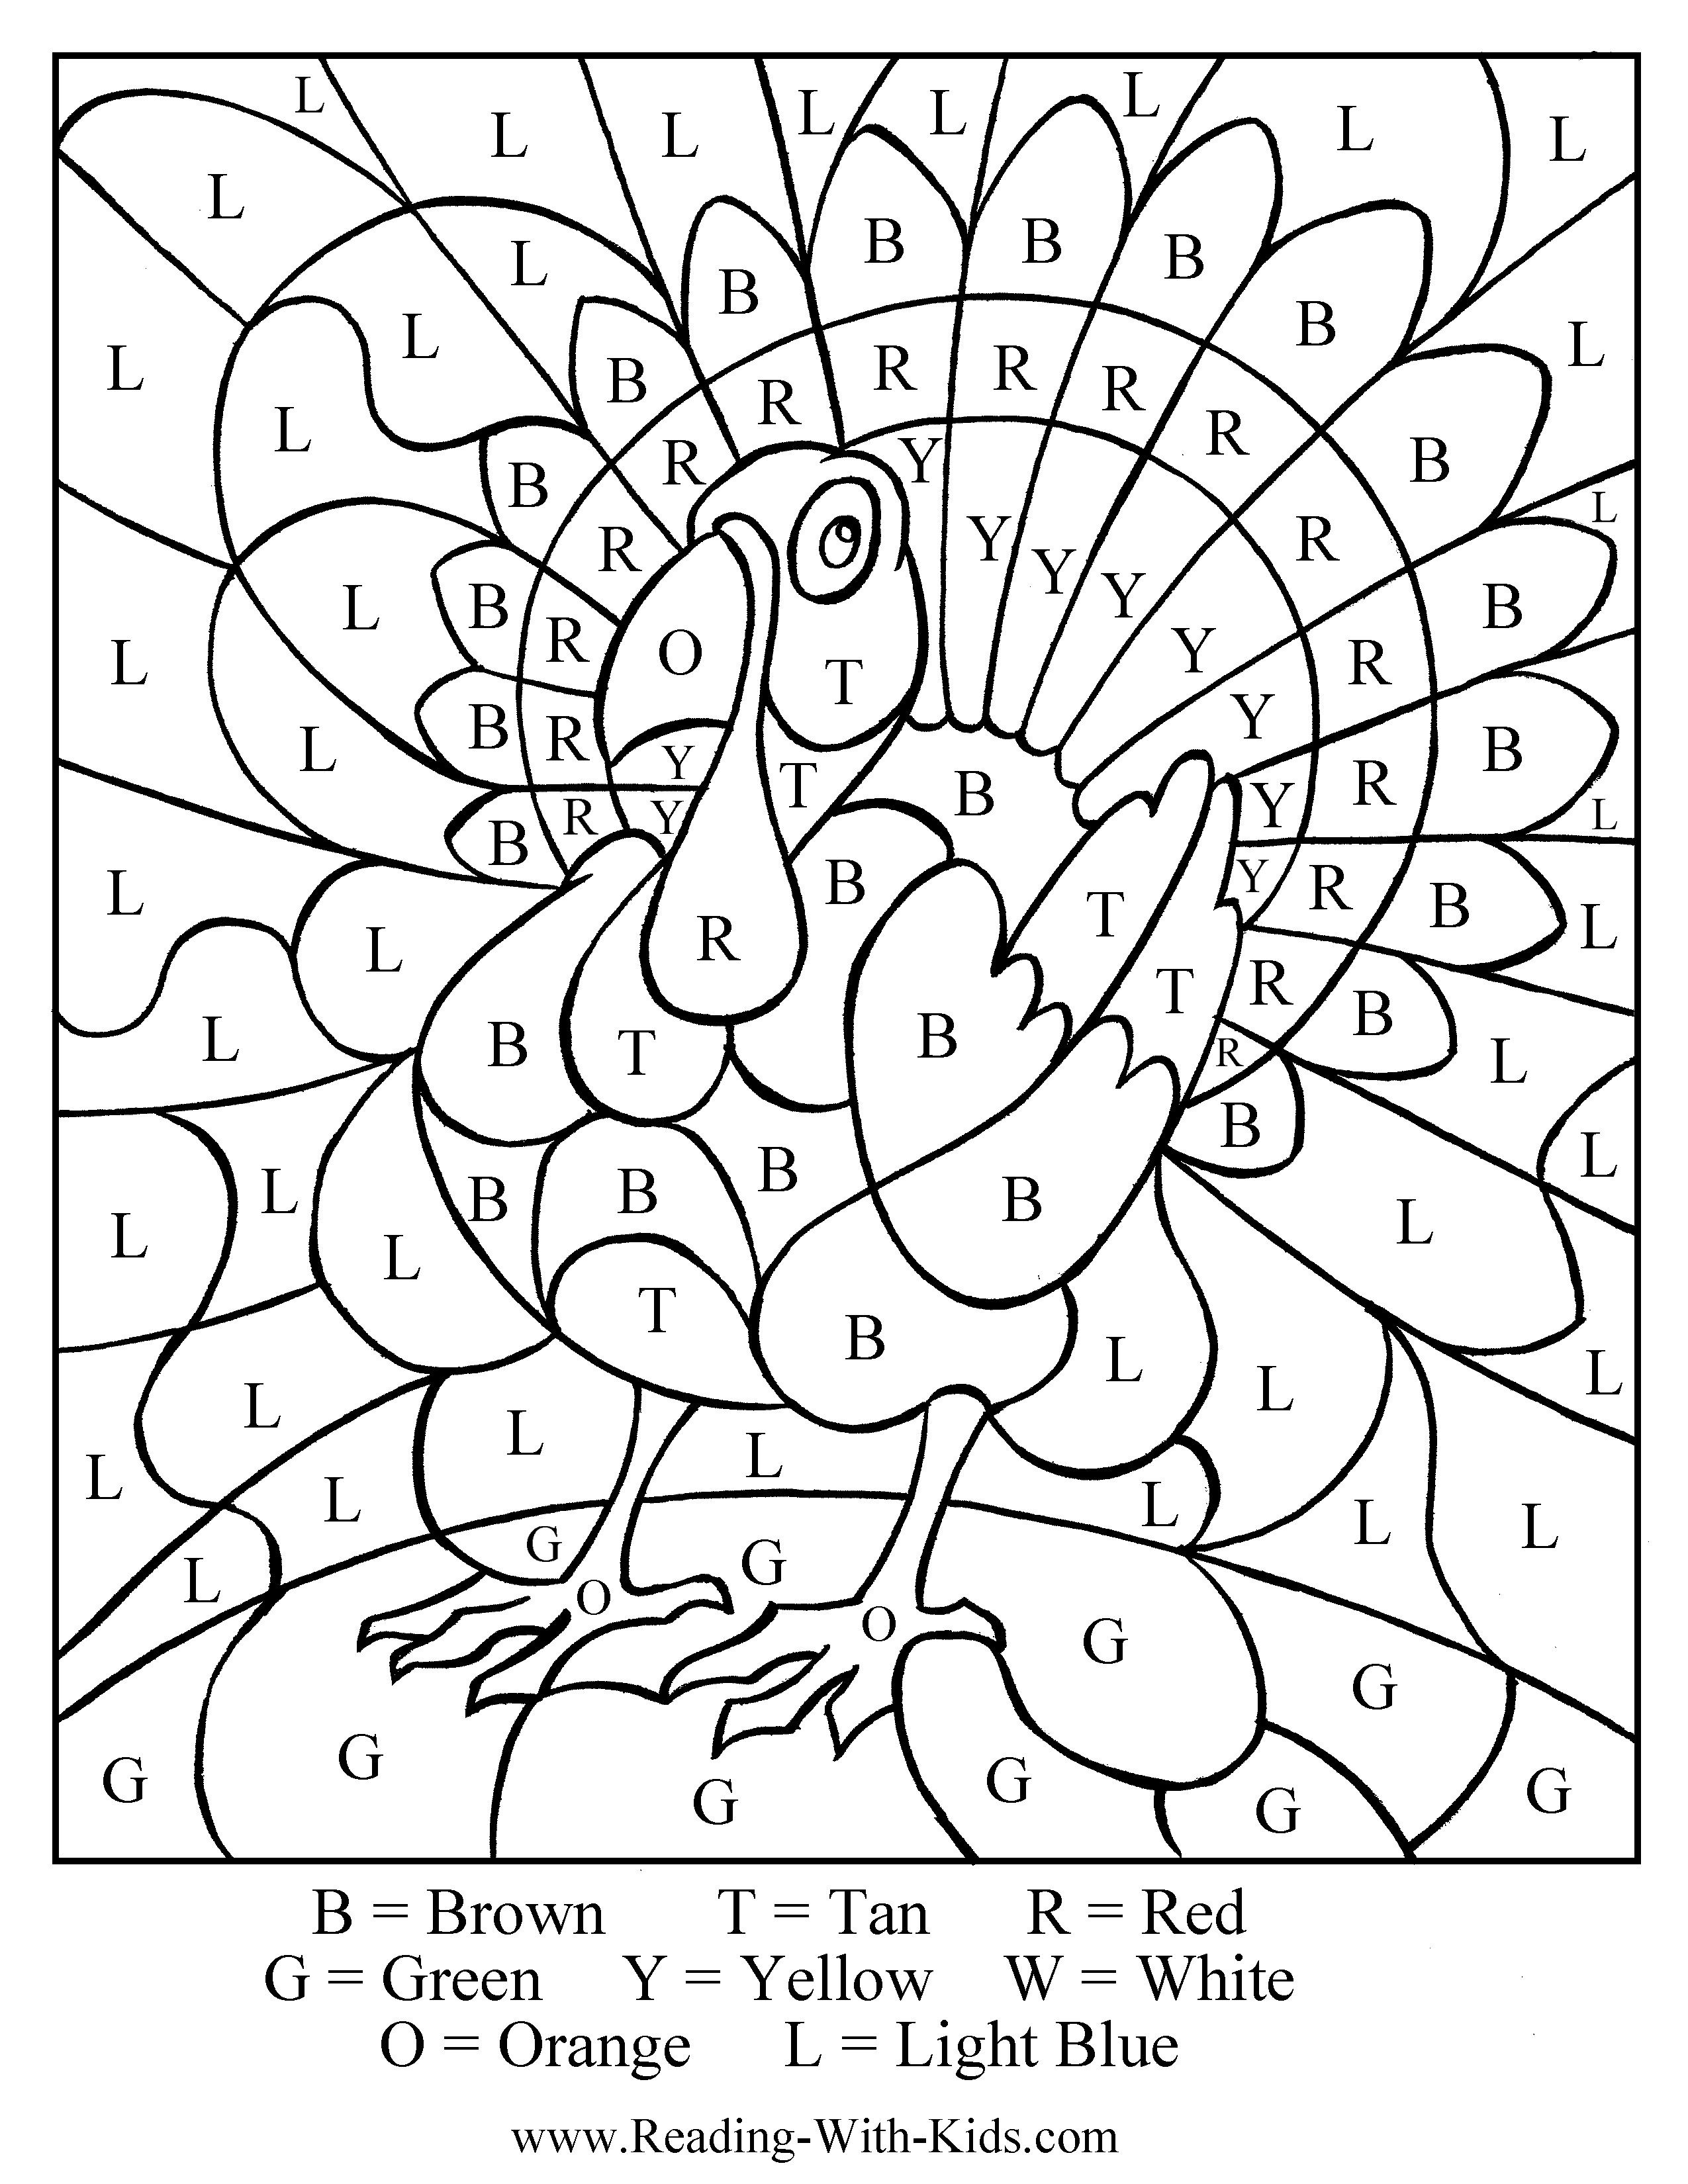 Colorletter Turkey - Great Idea For Thanksgiving #thanksgiving - Thanksgiving Printable Books Free